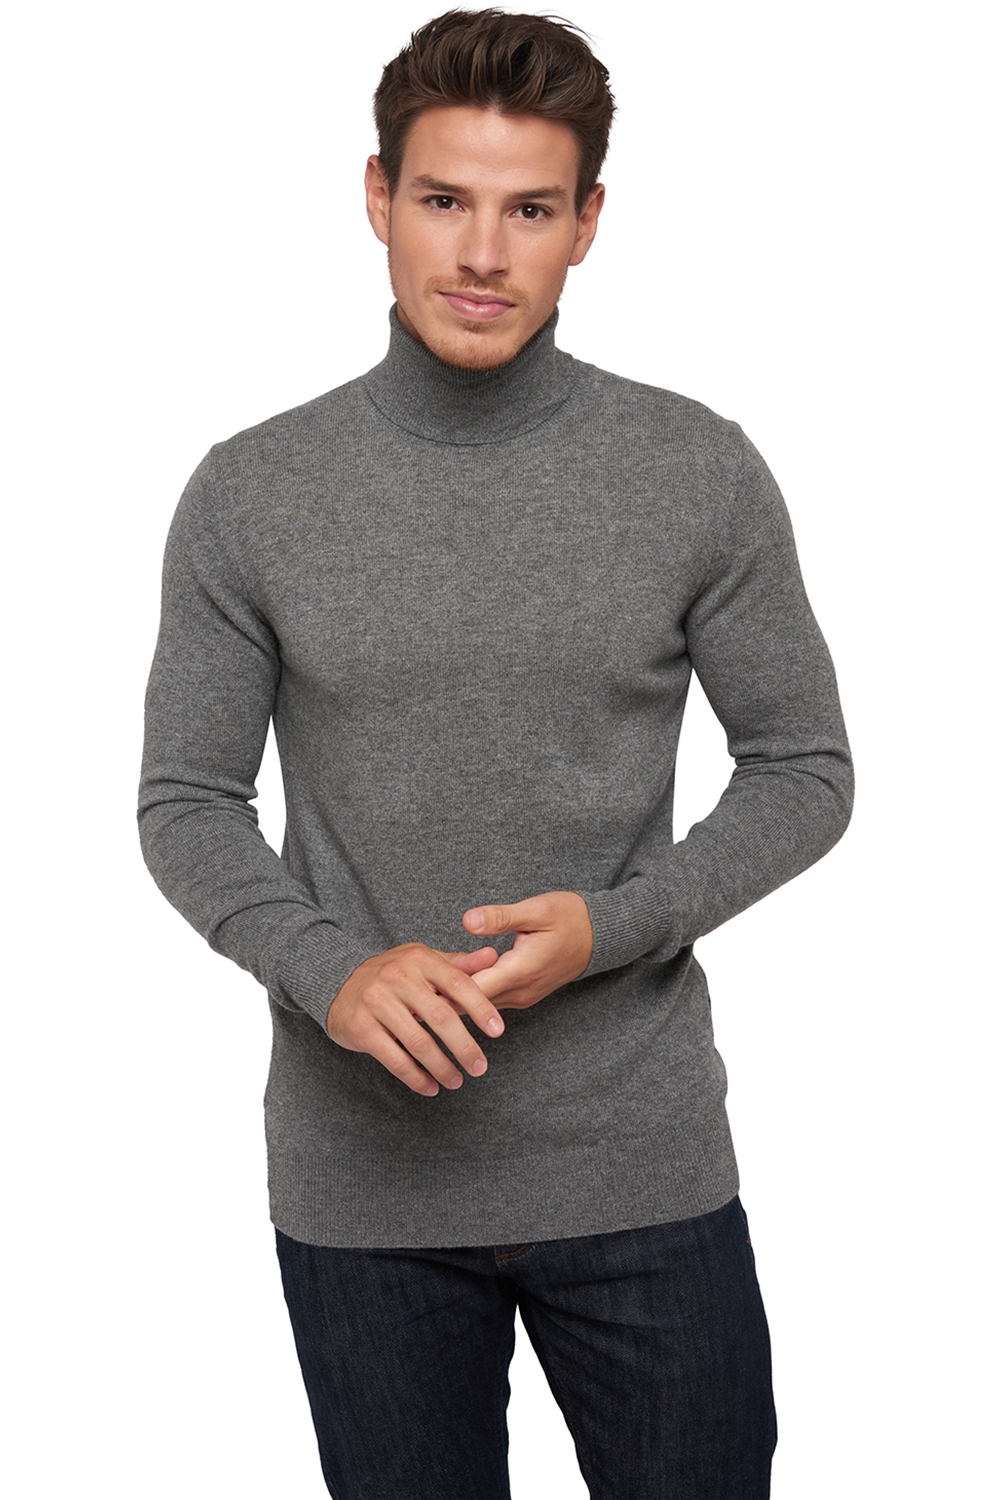 Cachemire petits prix homme tarry first gris chine m